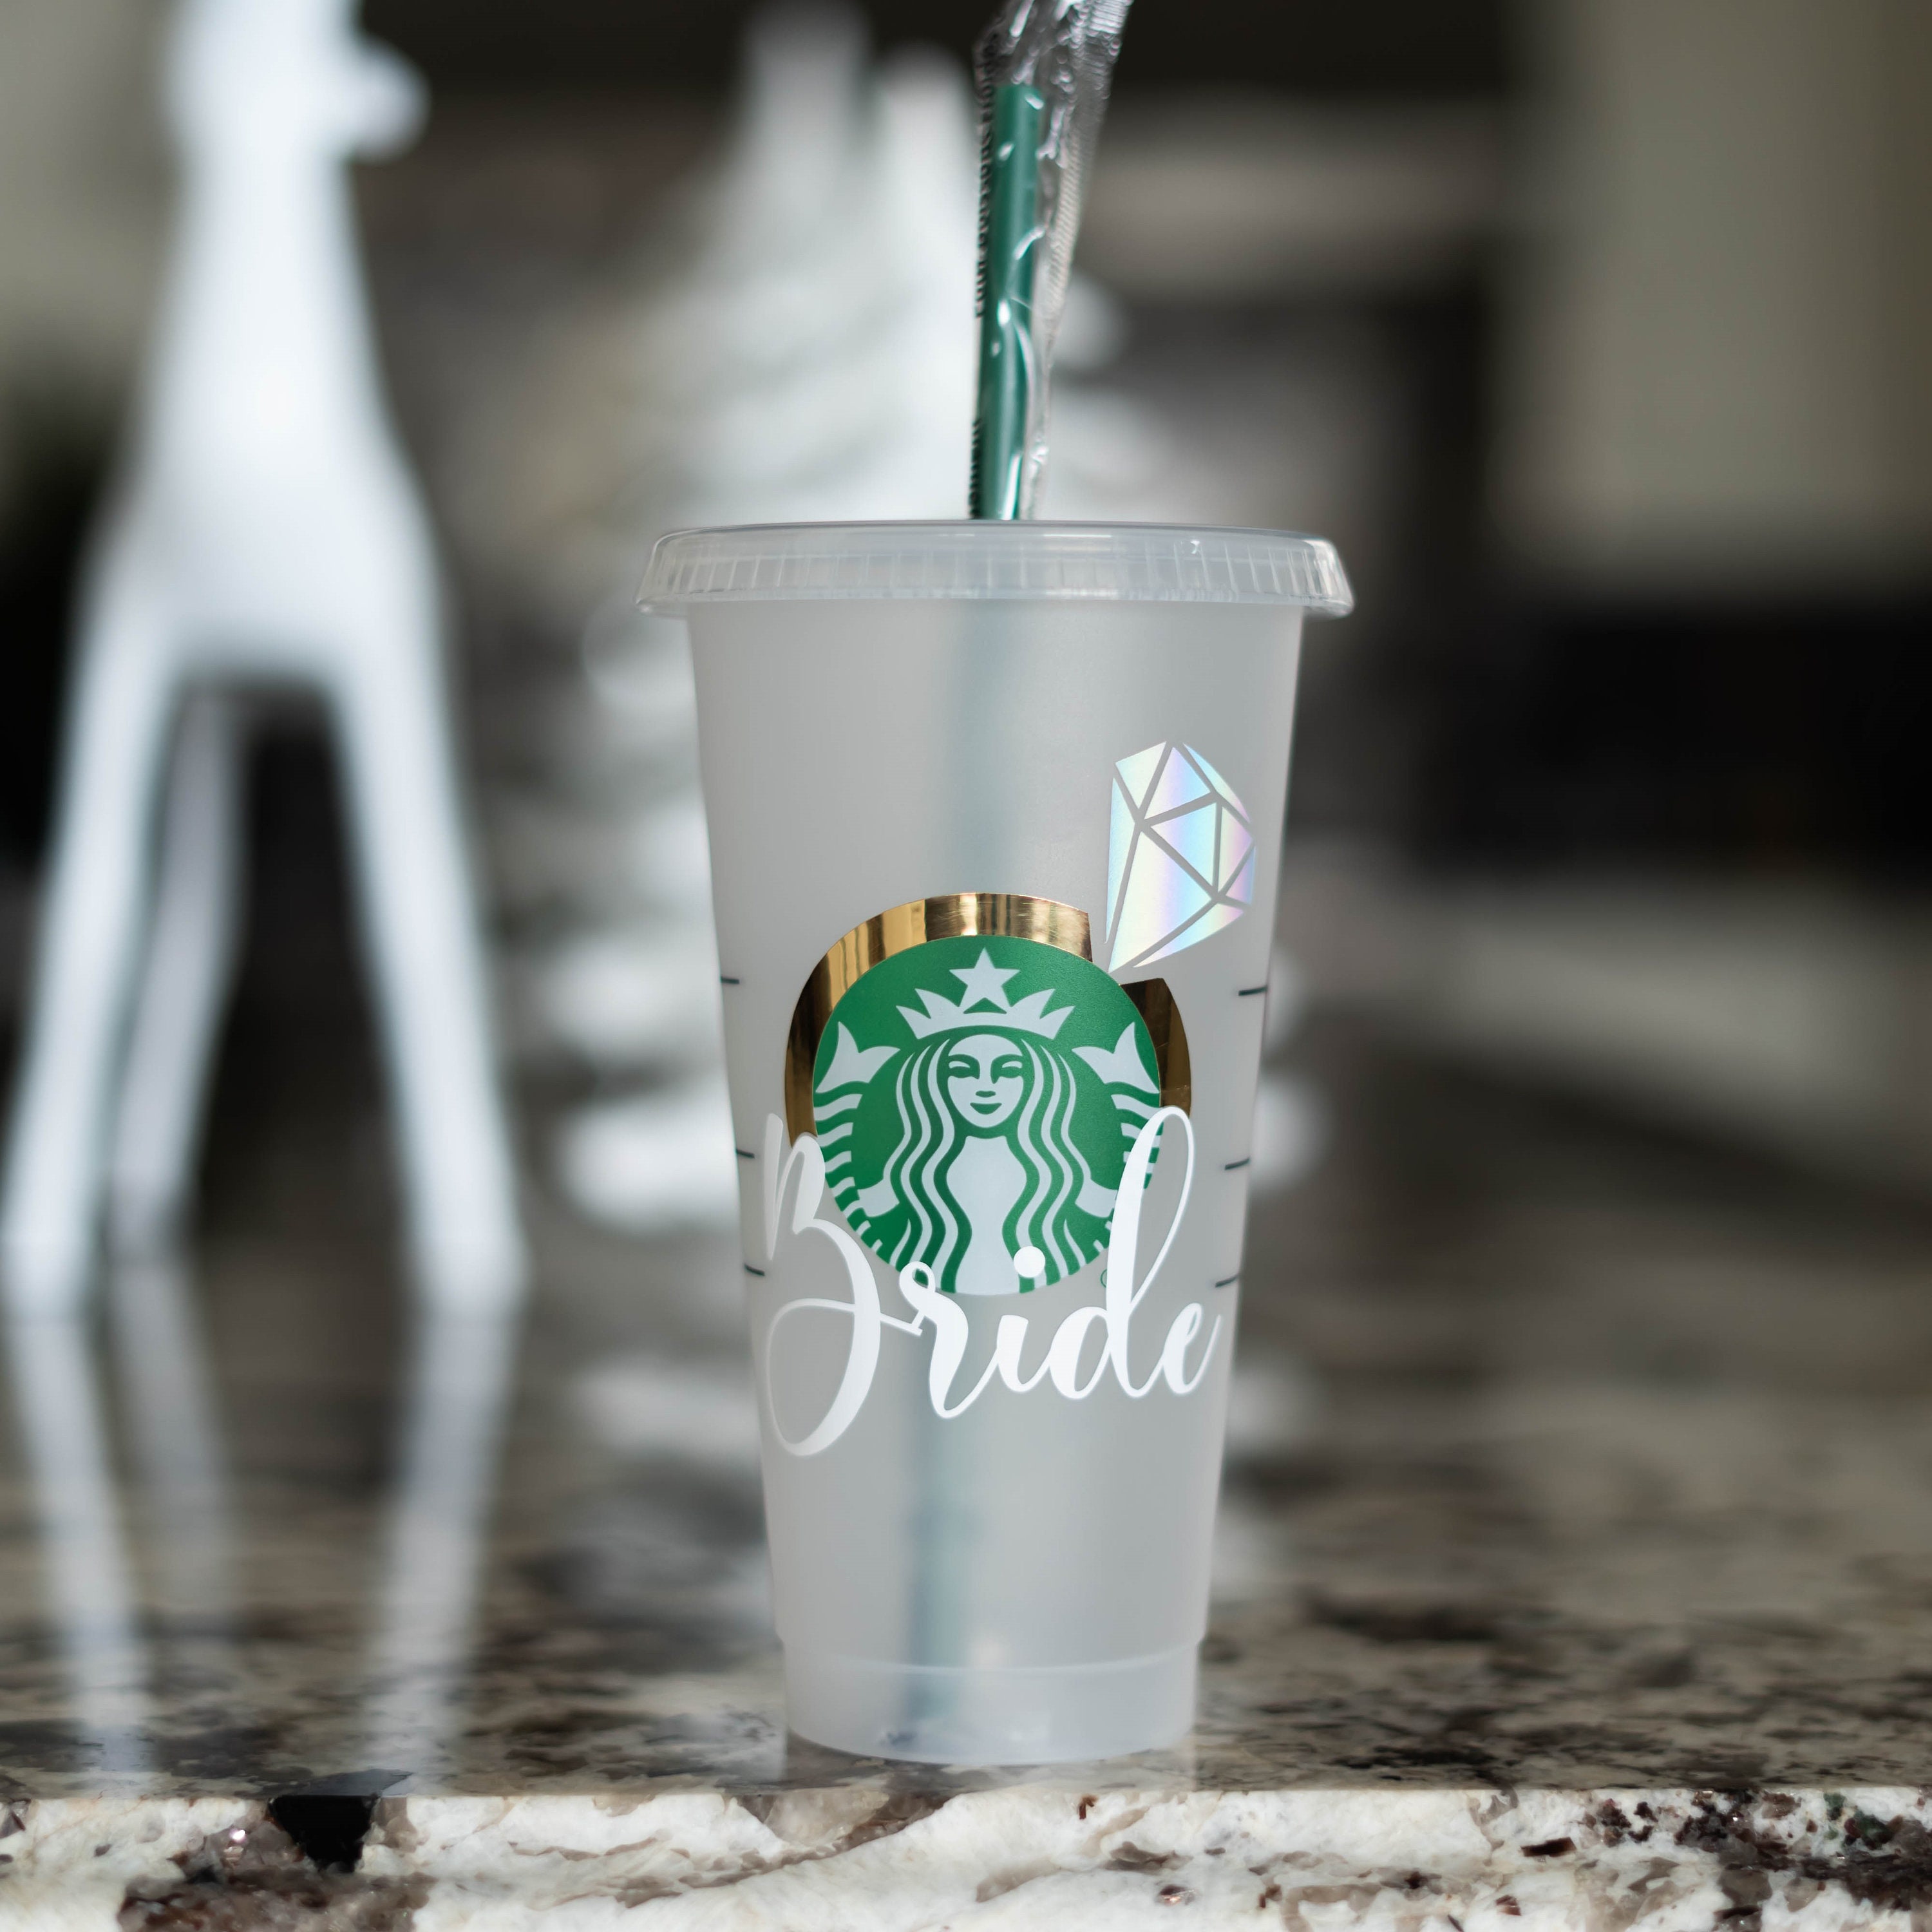 Bride & Groom Set Personalized Great gift! Starbucks Reusable Cups 